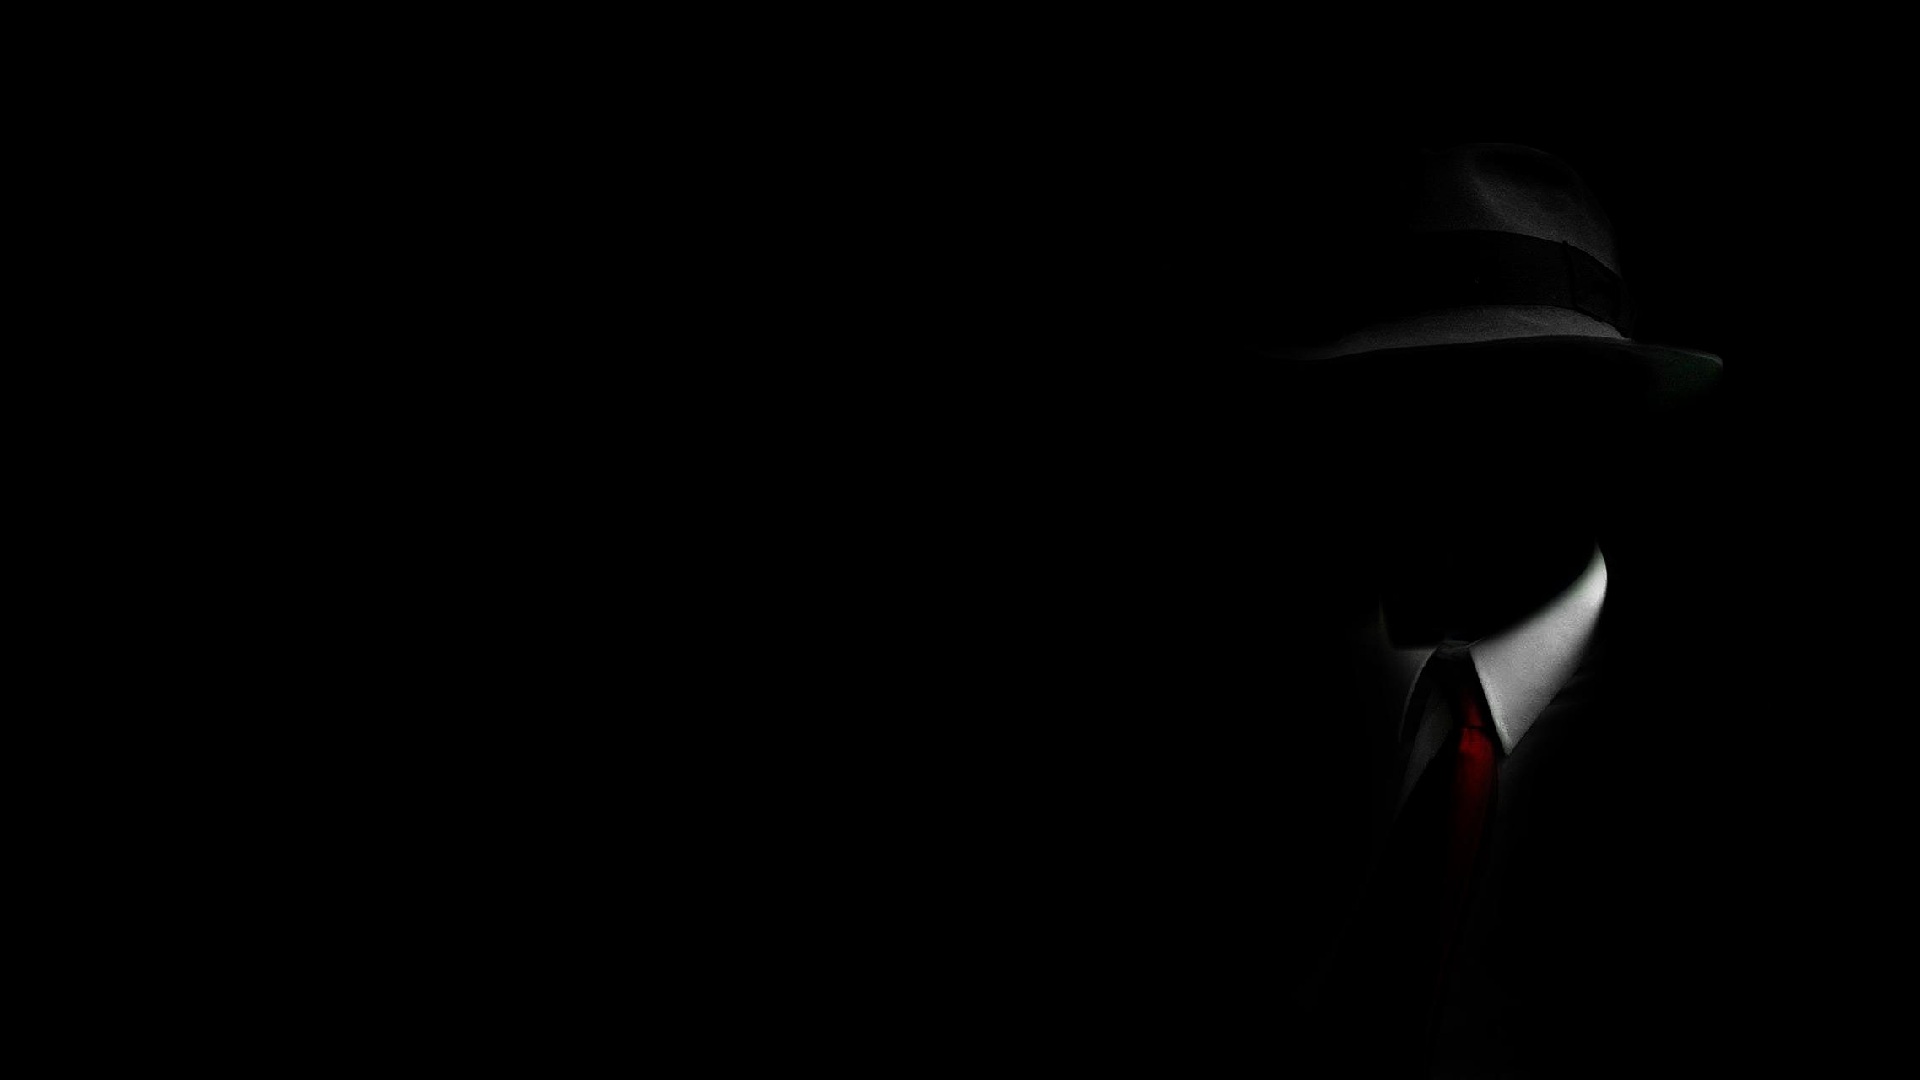 Download wallpaper 1920x1080 mask, neon, anonymous, black full hd, hdtv,  fhd, 1080p hd background